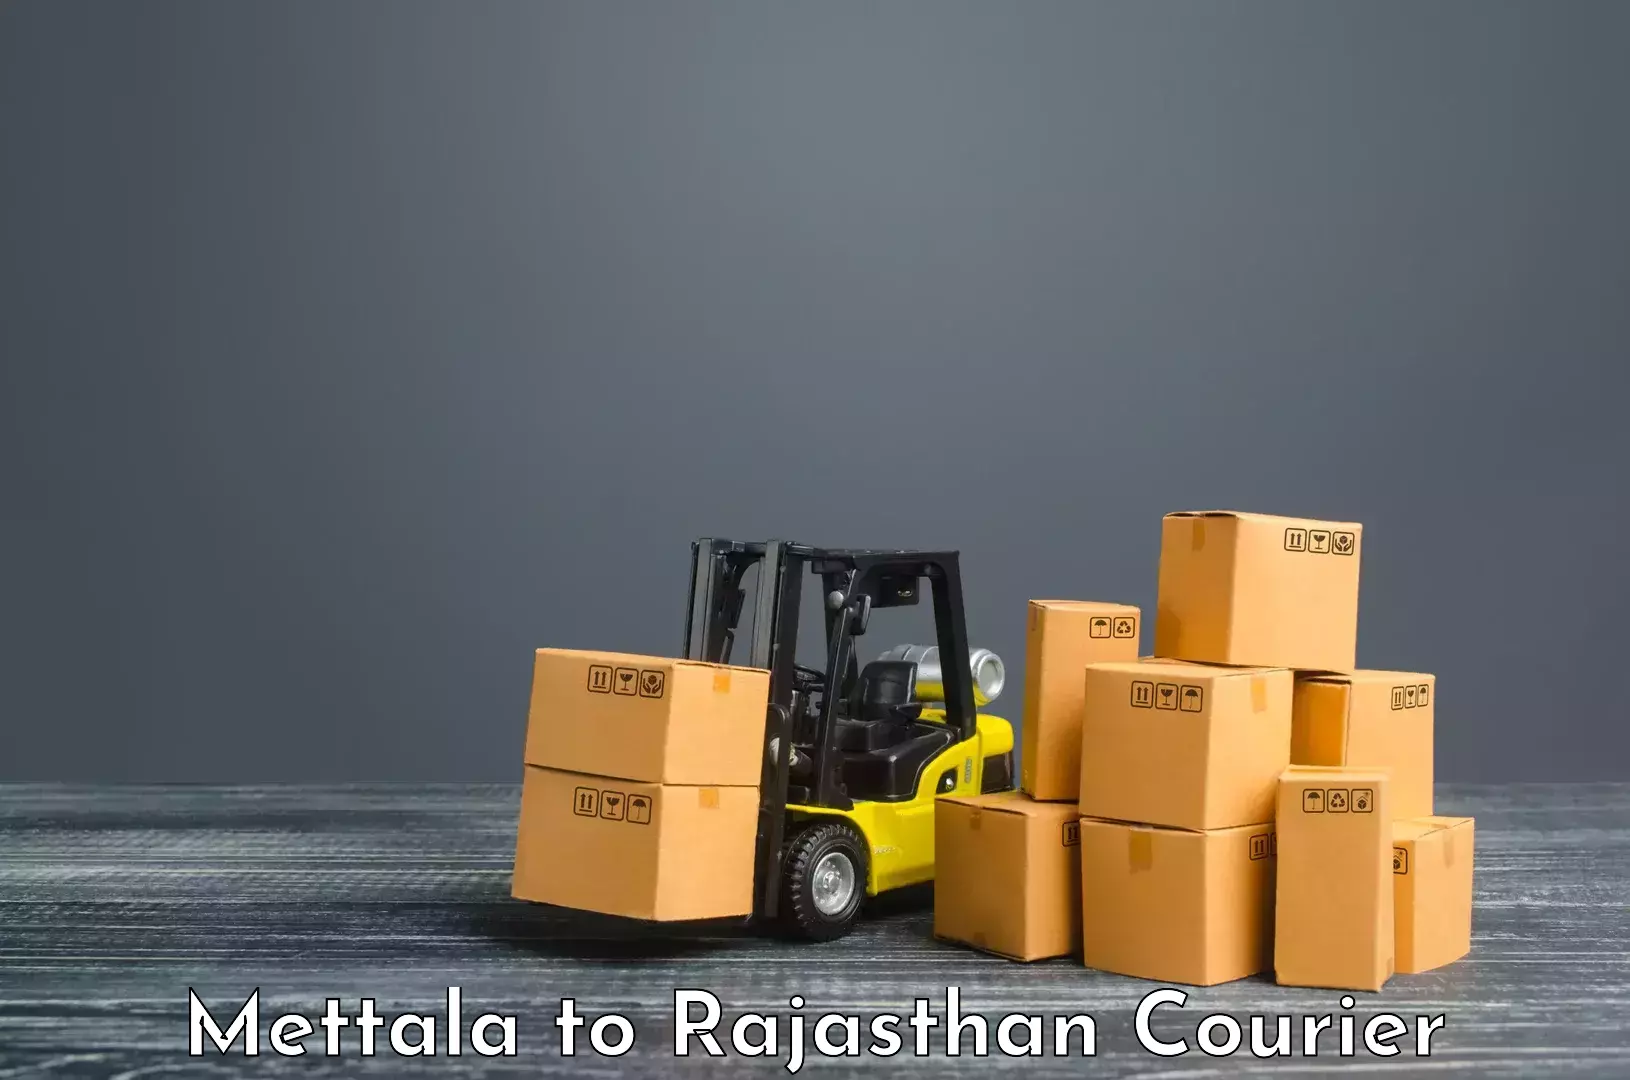 Sustainable shipping practices Mettala to Chhabra